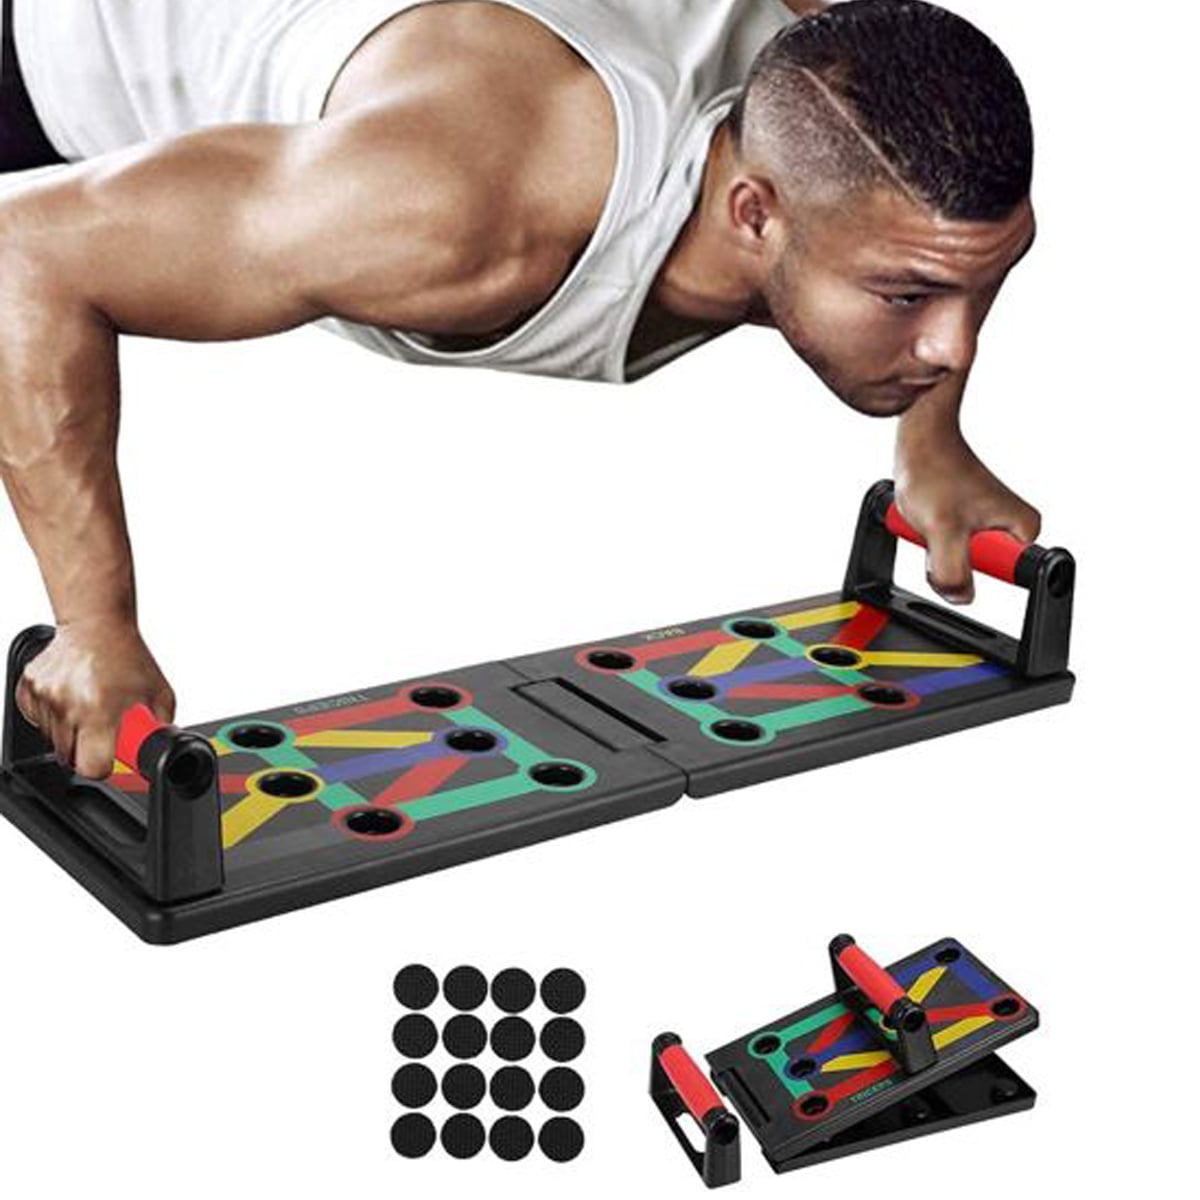 Push Up Rack Board Fitness Workout Train Gym Muscle Train Exercise Pushup Stands 